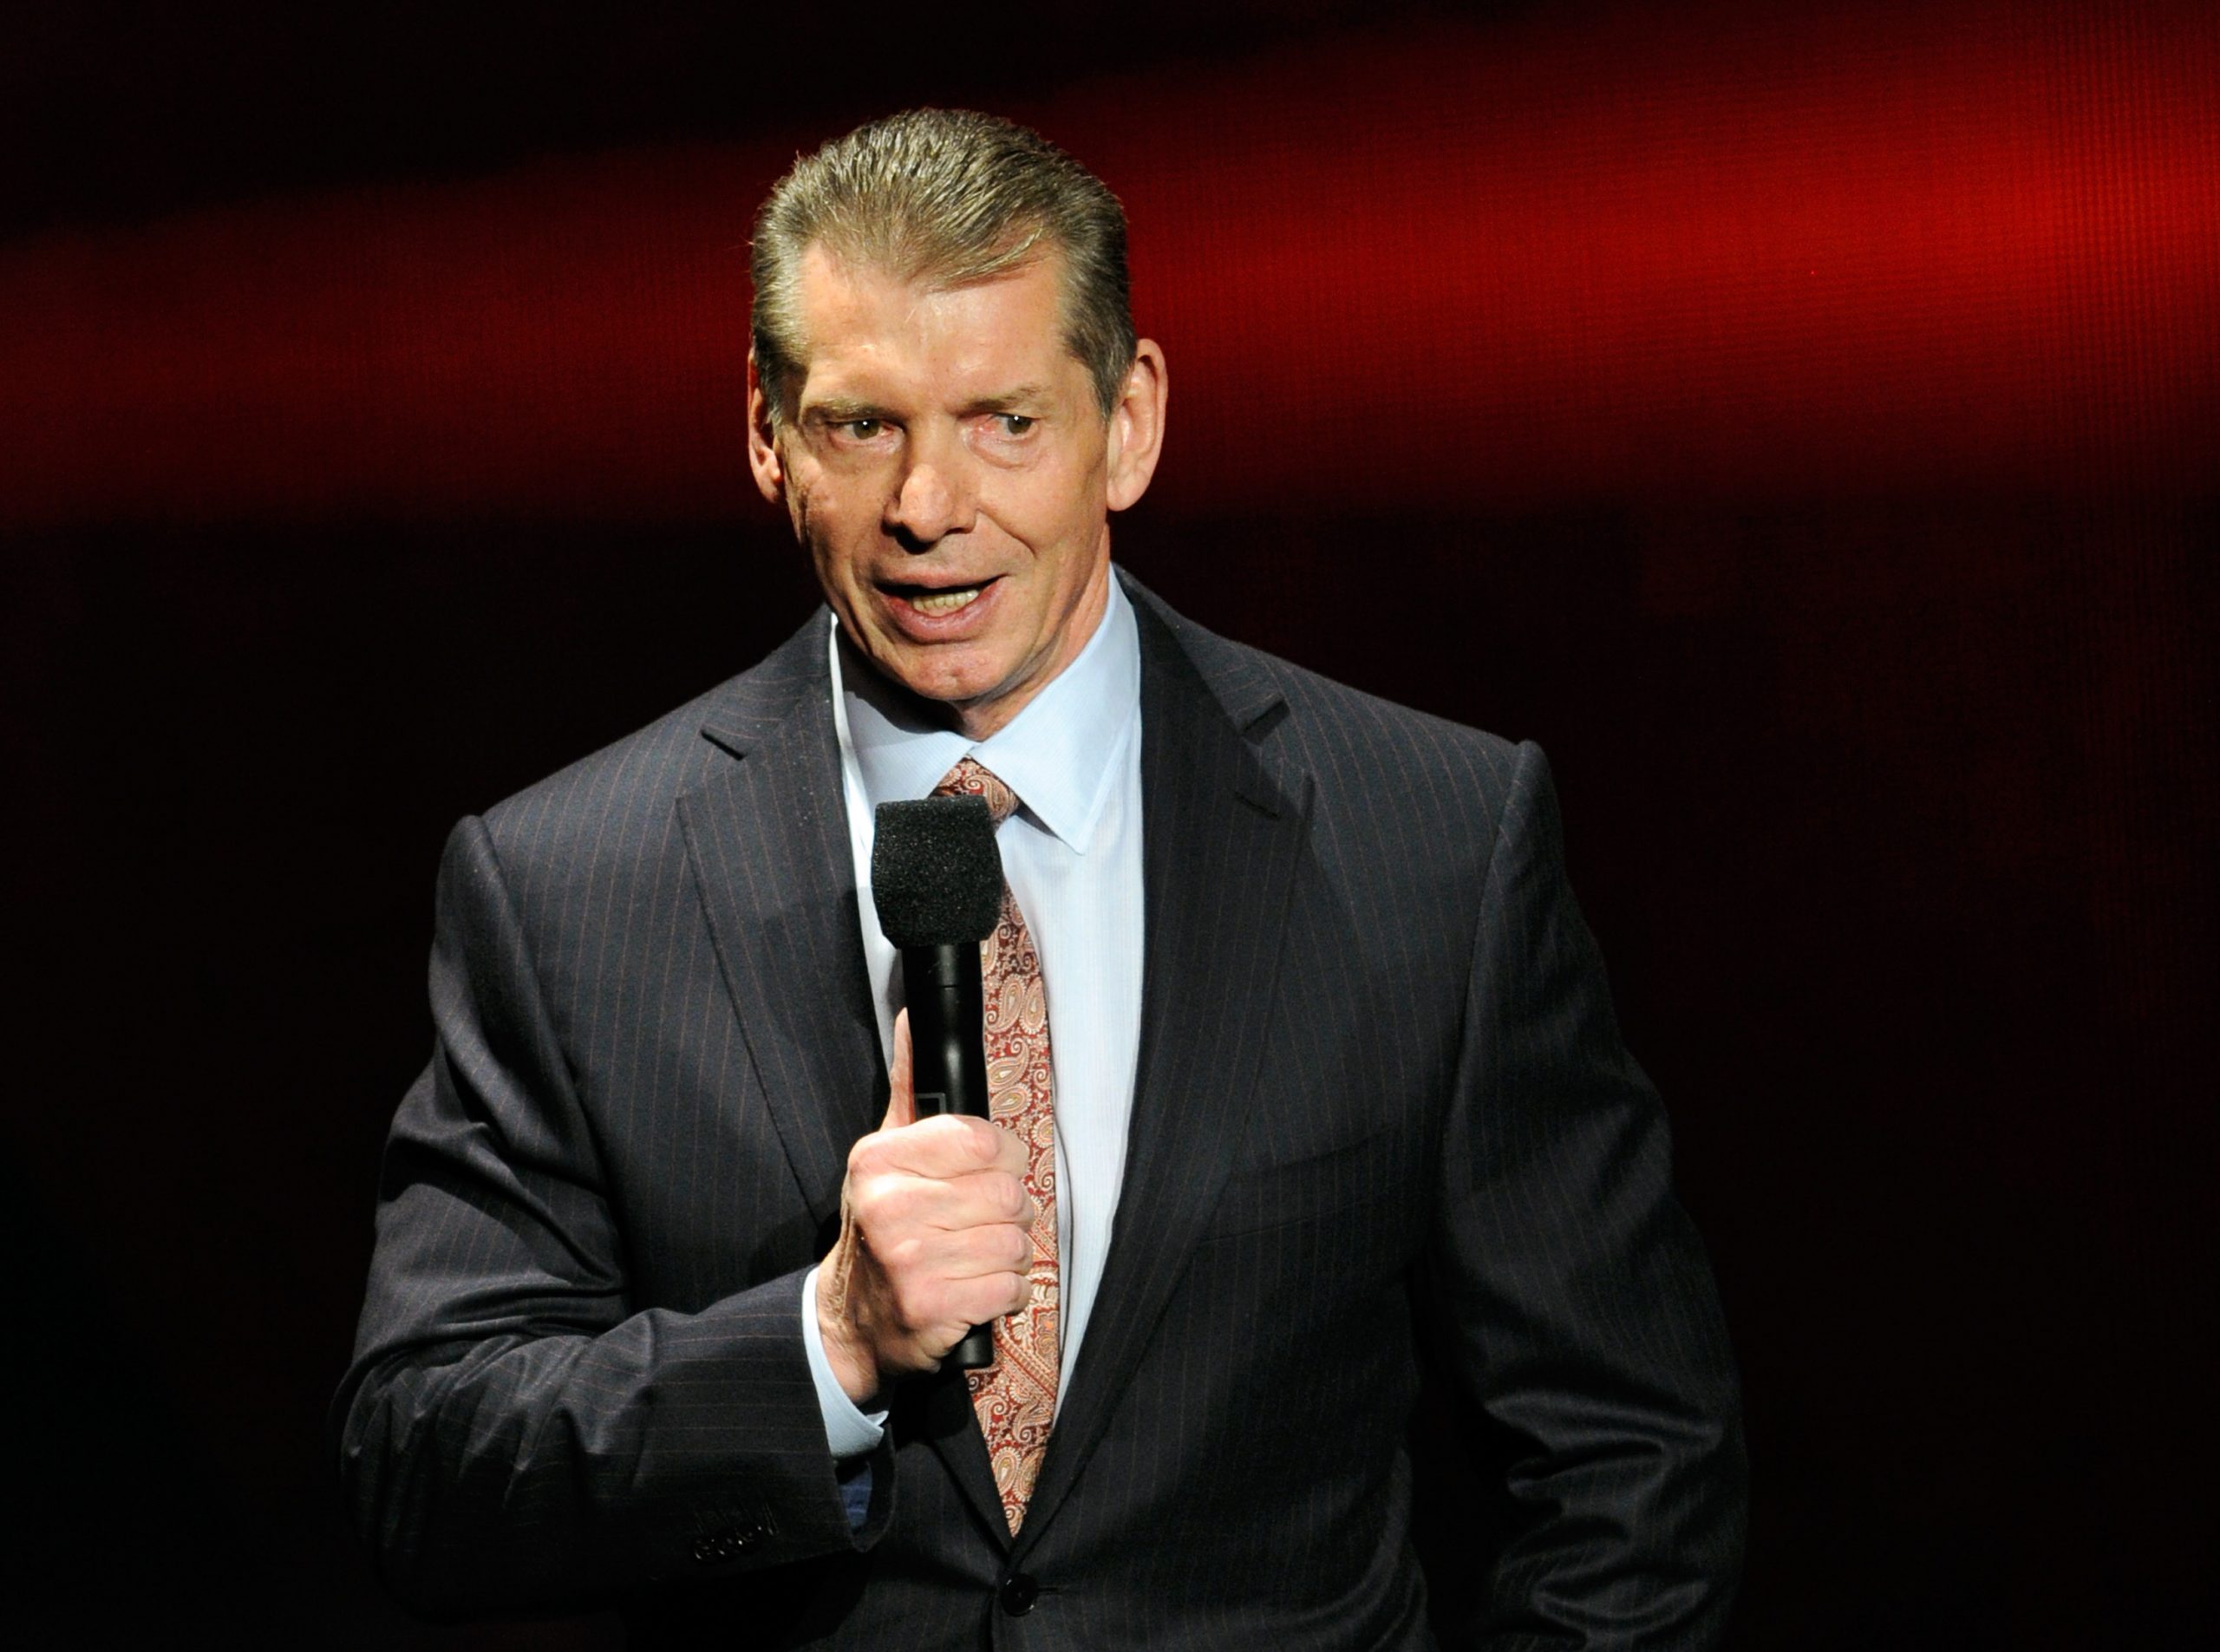 WWE Chairman and CEO Vince McMahon speaks at a news conference.